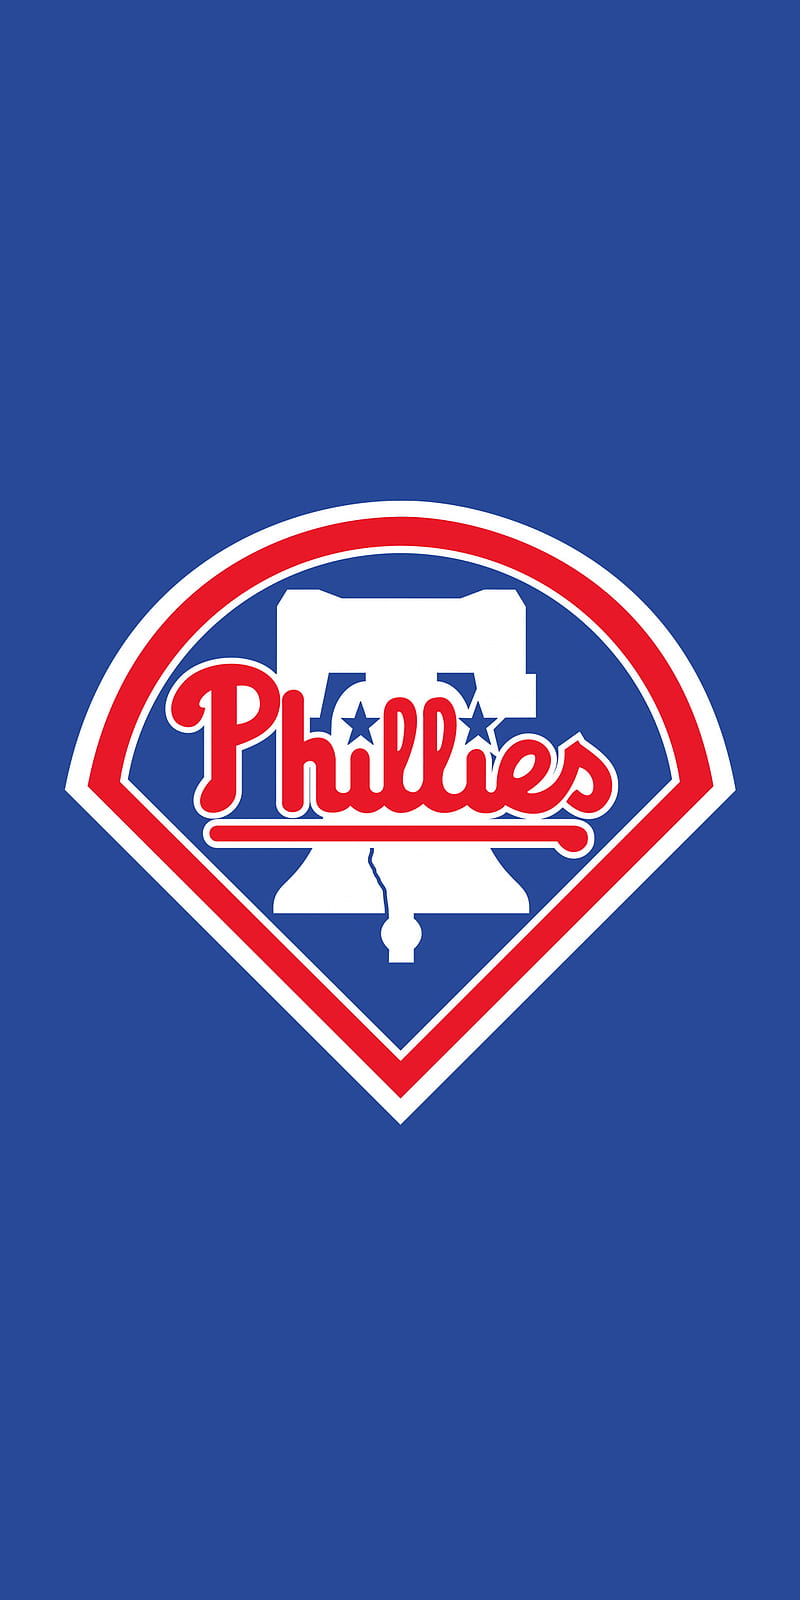 Philadelphia Phillies on Twitter Some Wednesday wallpapers per your many  requests RingTheBell httpstcoUpbbZZEPE9  Twitter